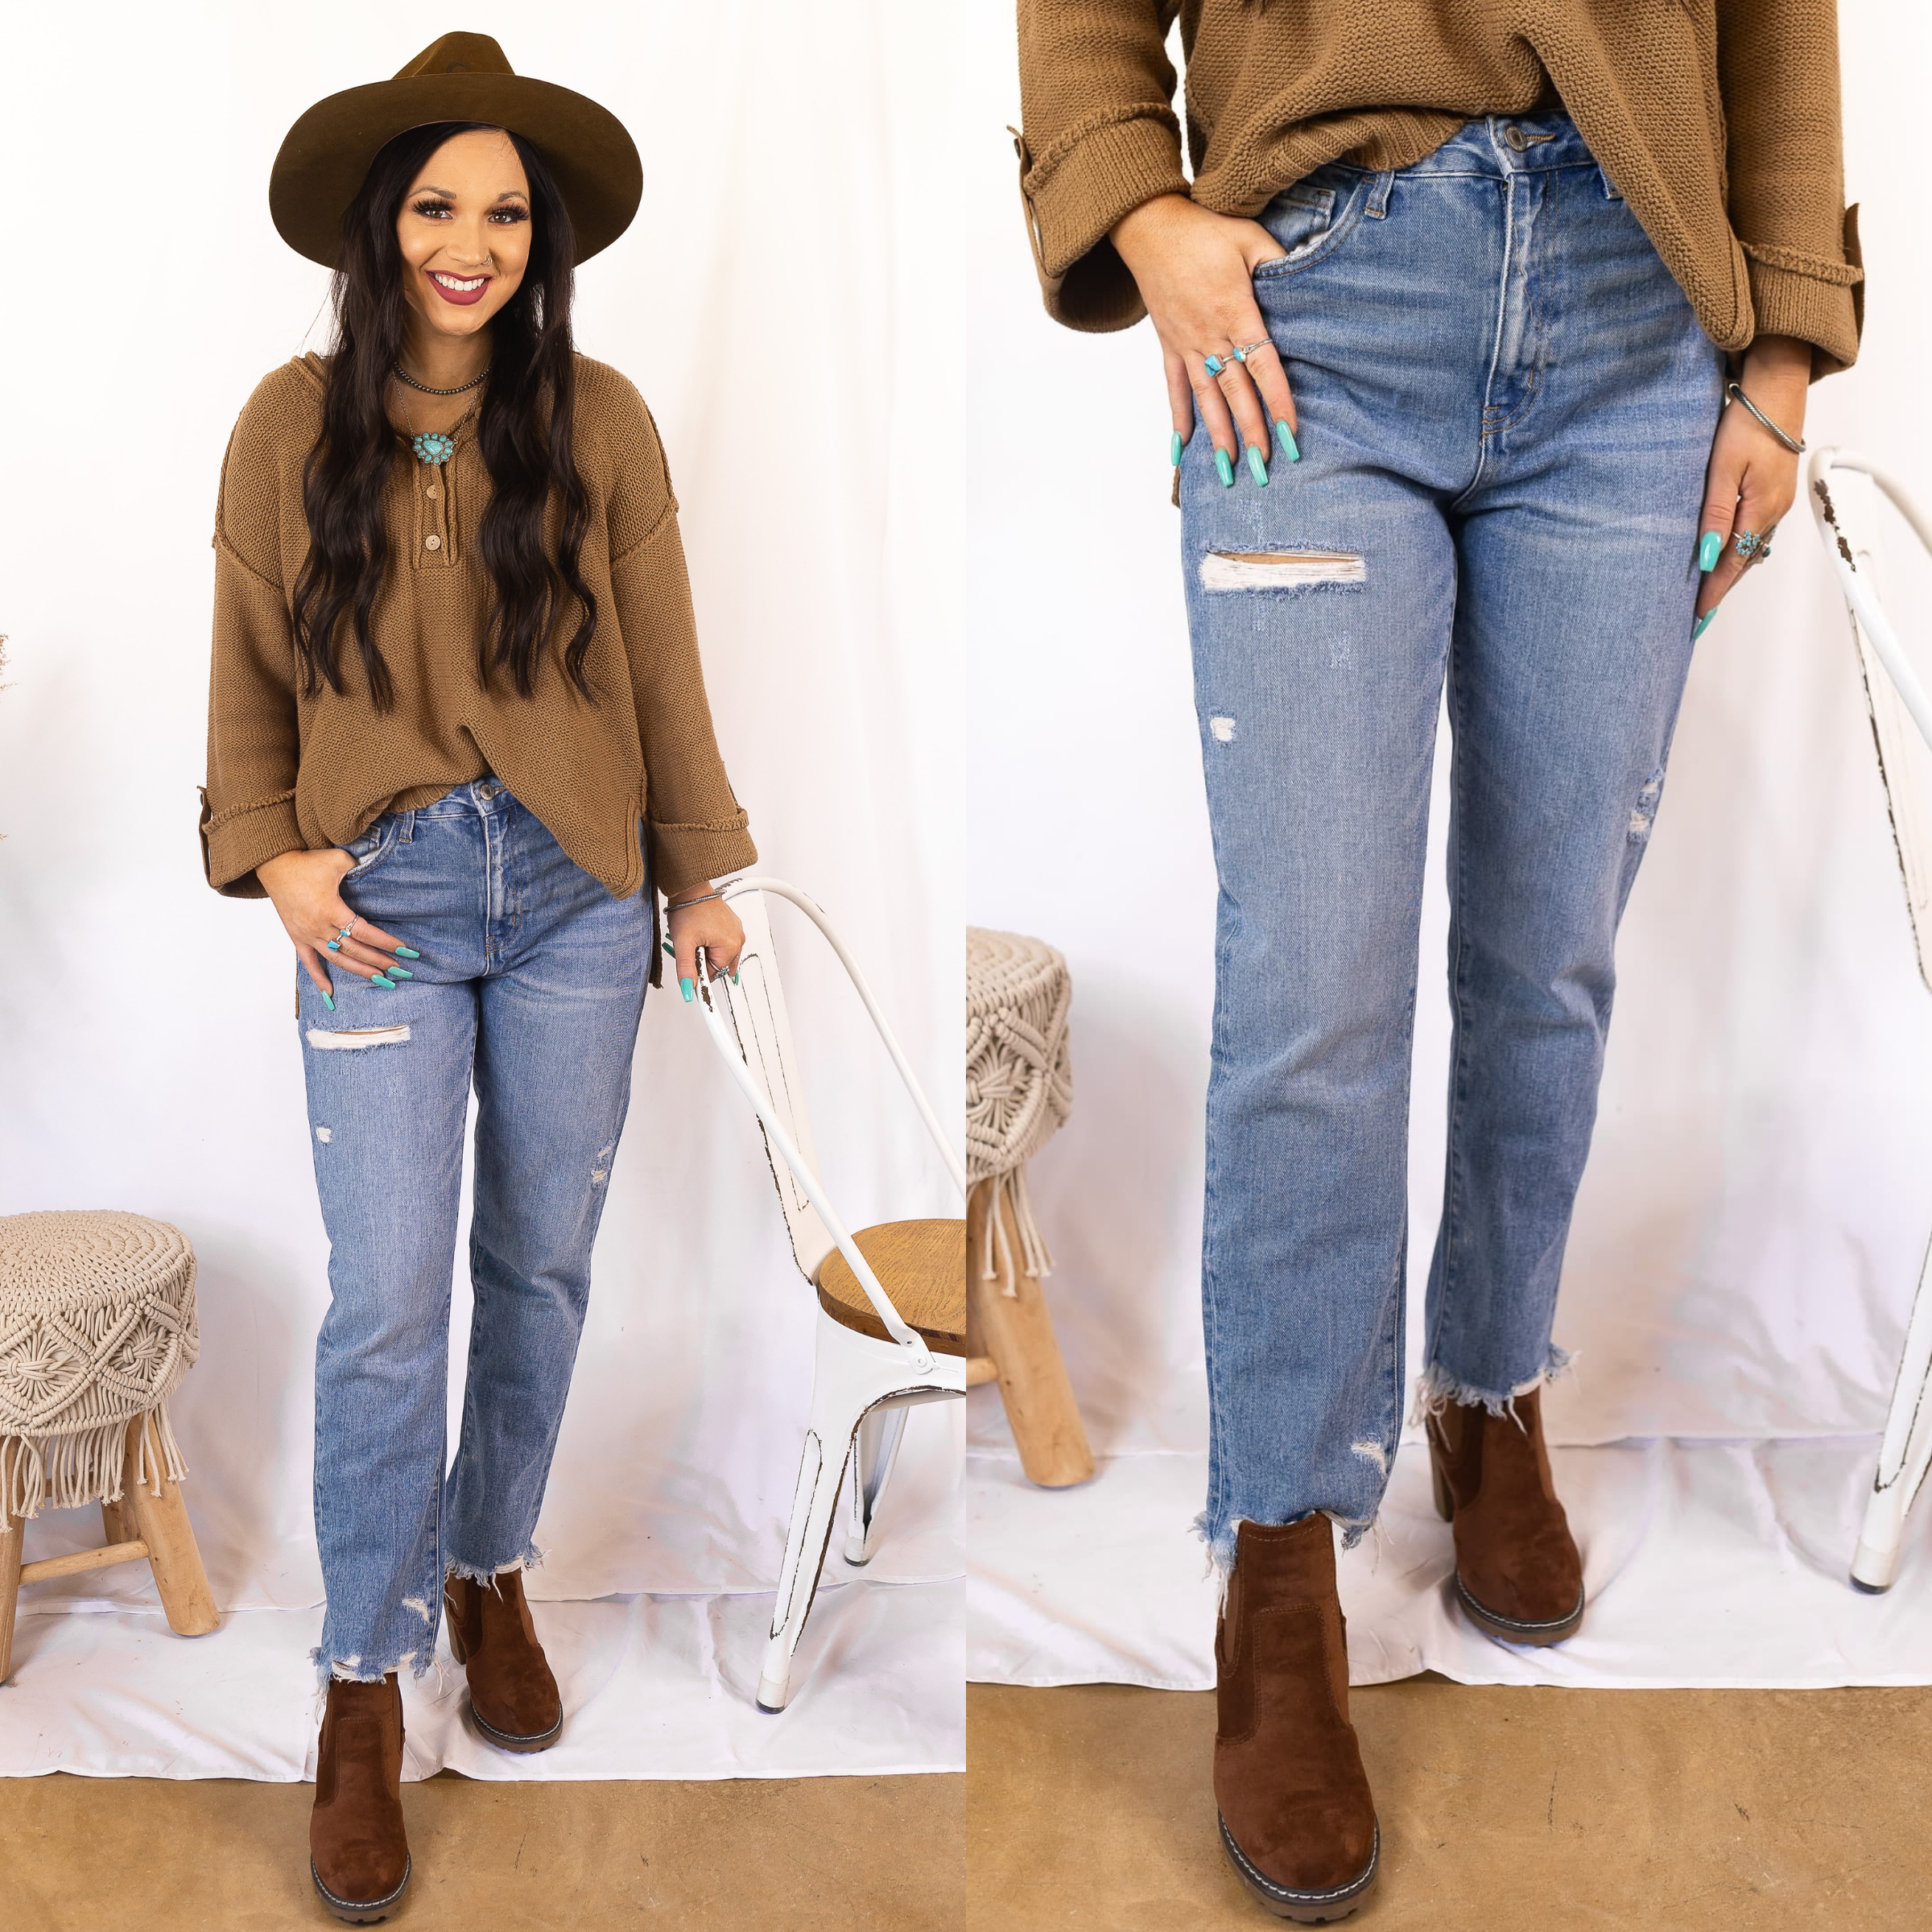 Model is wearing a frayed hem mom jean that is a light wash with slight distressing. Model has it paired with a tan sweater, brown booties, and a brown hat.